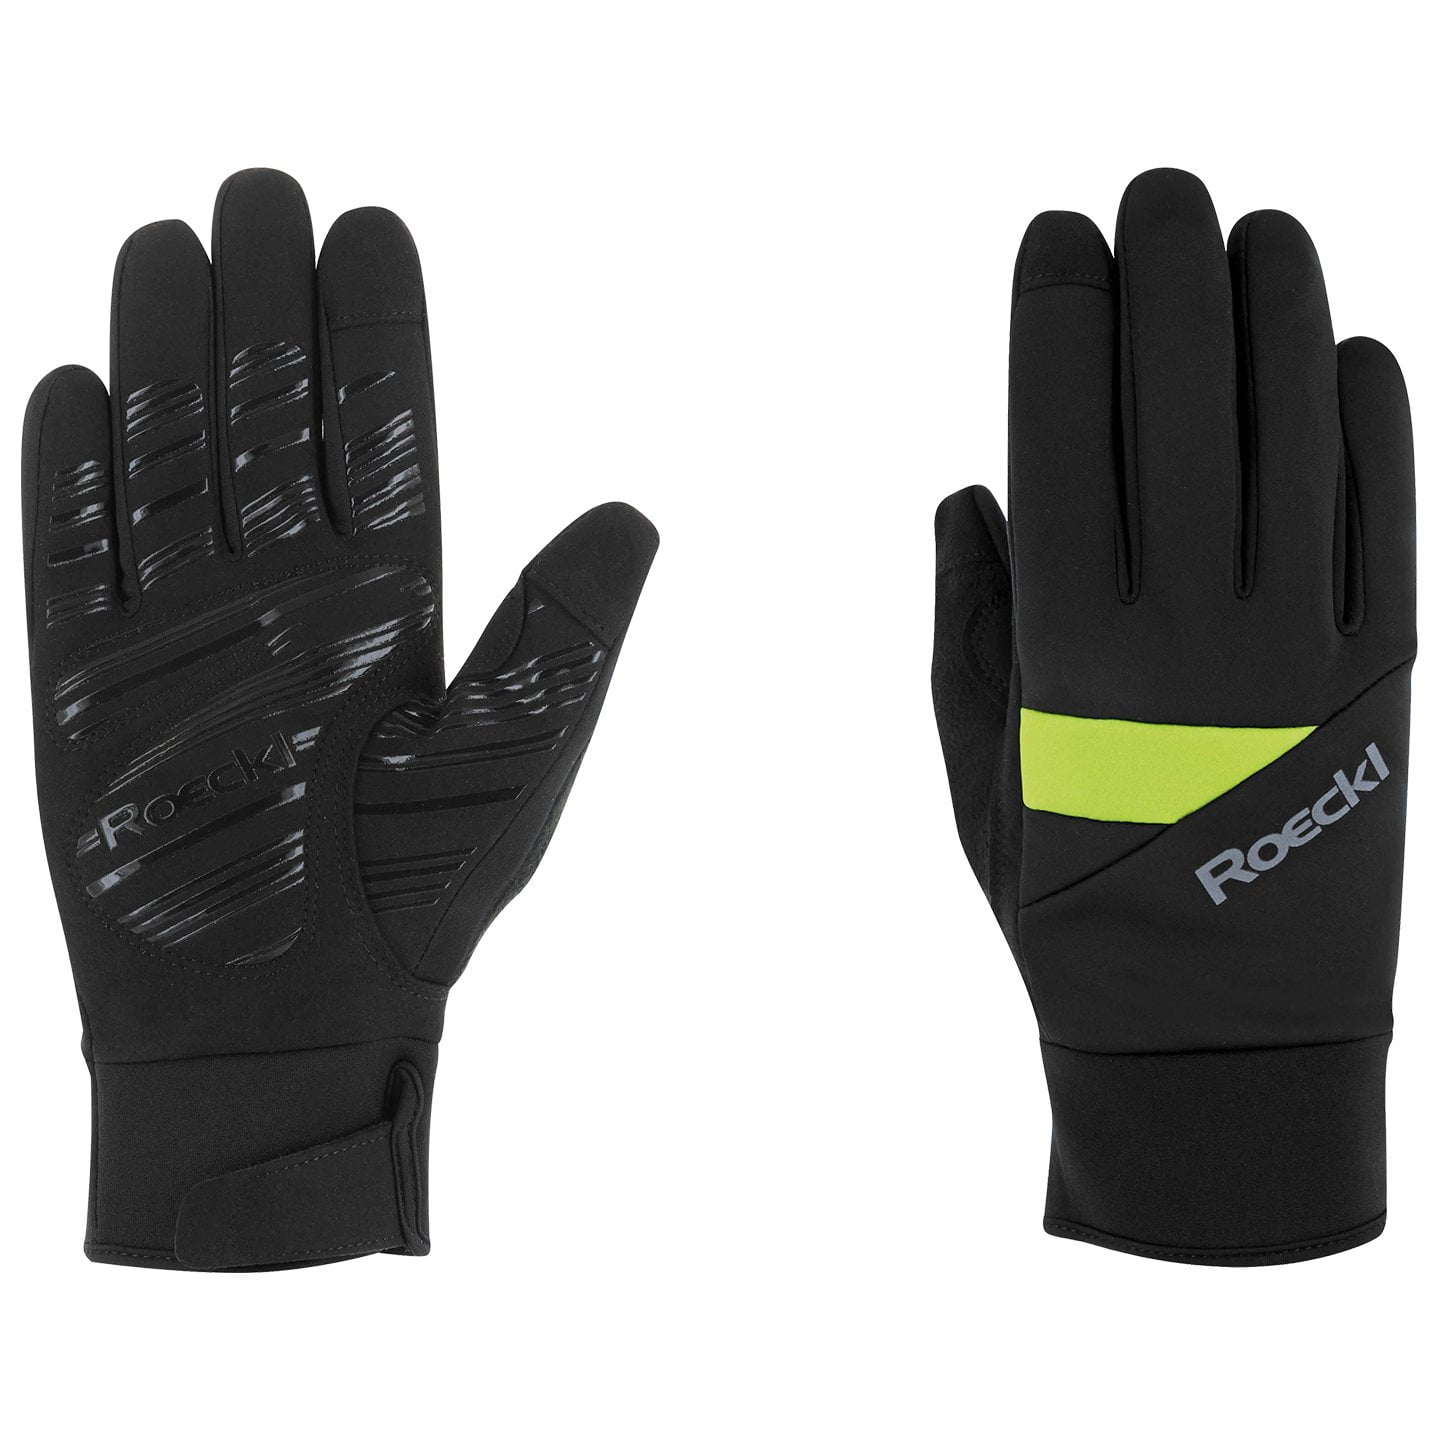 ROECKL Reichenthal jr. Kids Winter Gloves Winter Cycling Gloves, for men, size 5